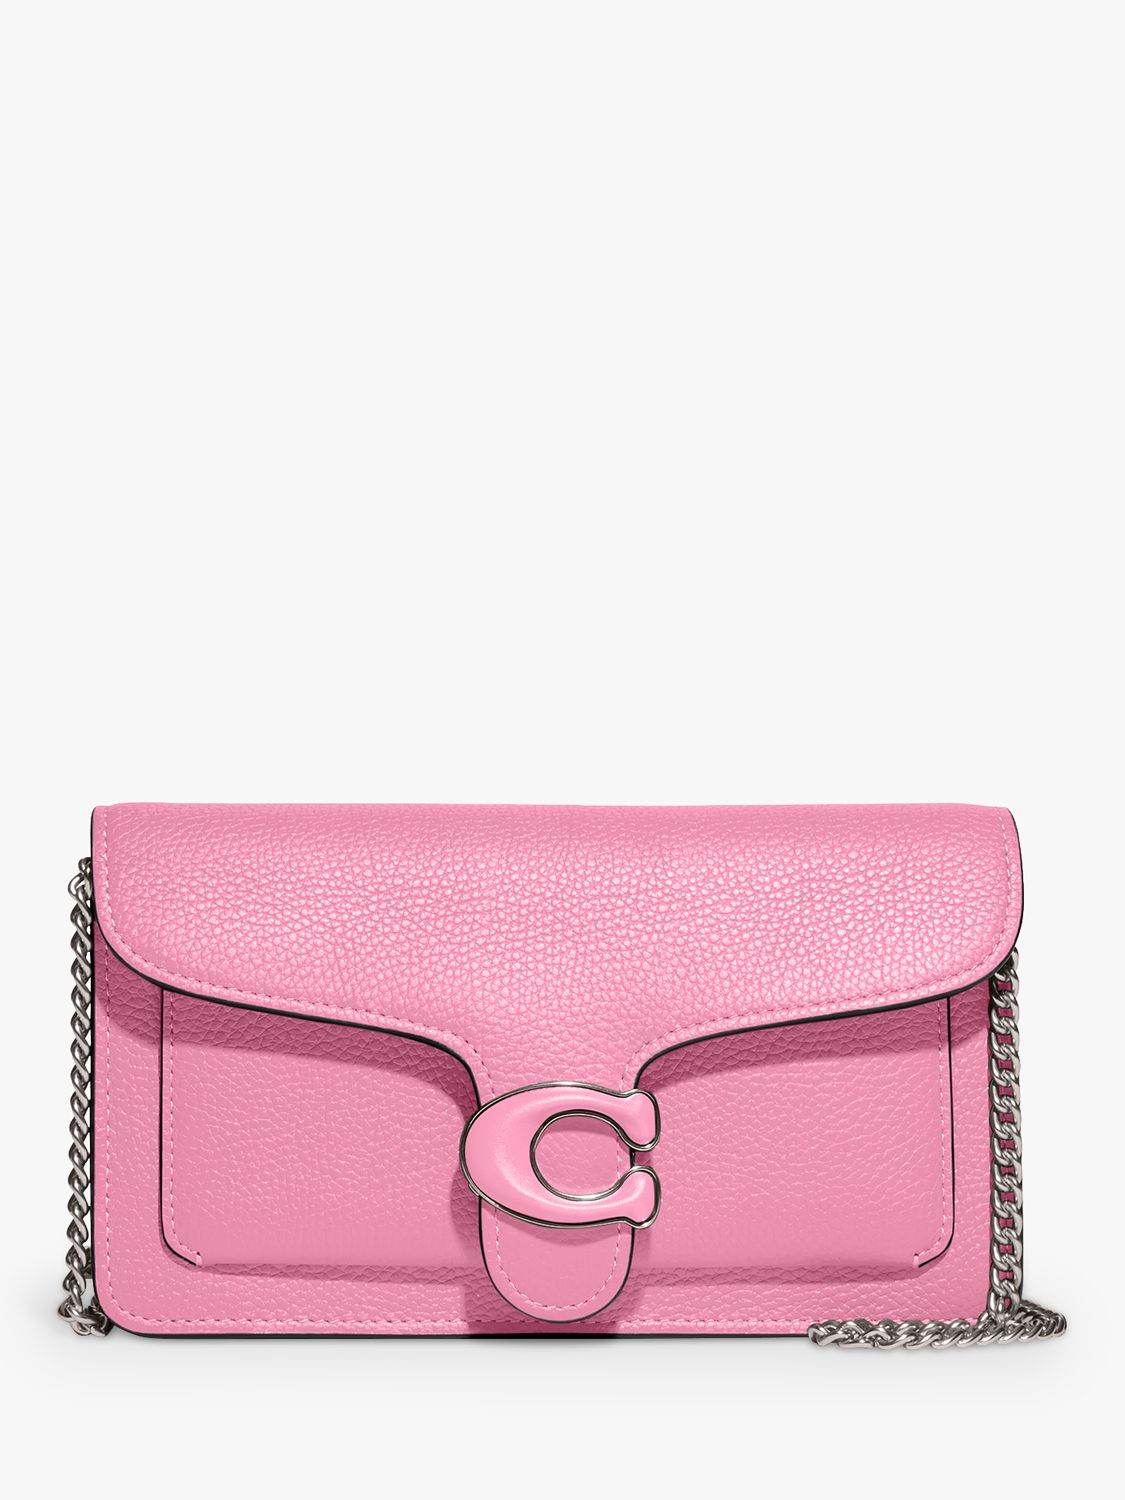 Coach Tabby Chain Leather Clutch Bag, Vivid Pink at John Lewis & Partners